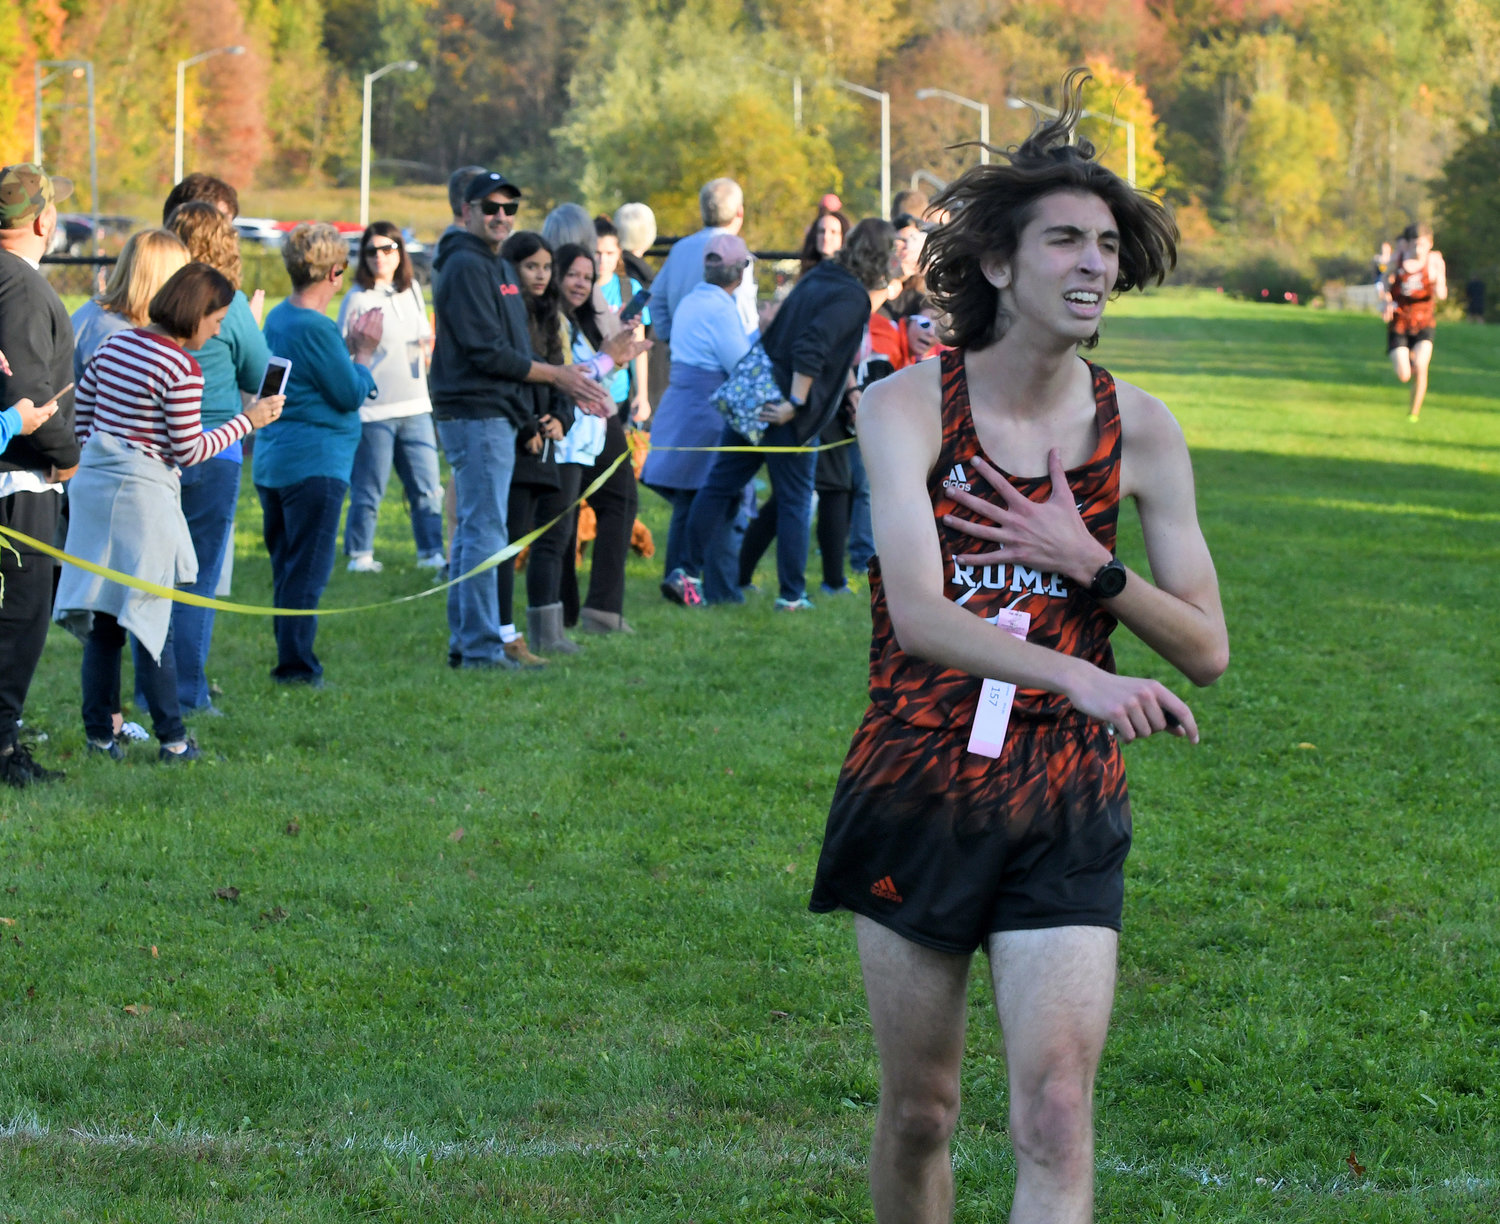 Rome Free Academy cross country runner Carson Campbell reacts after finishing second at the race Tuesday afternoon hosted by the Black Knights.